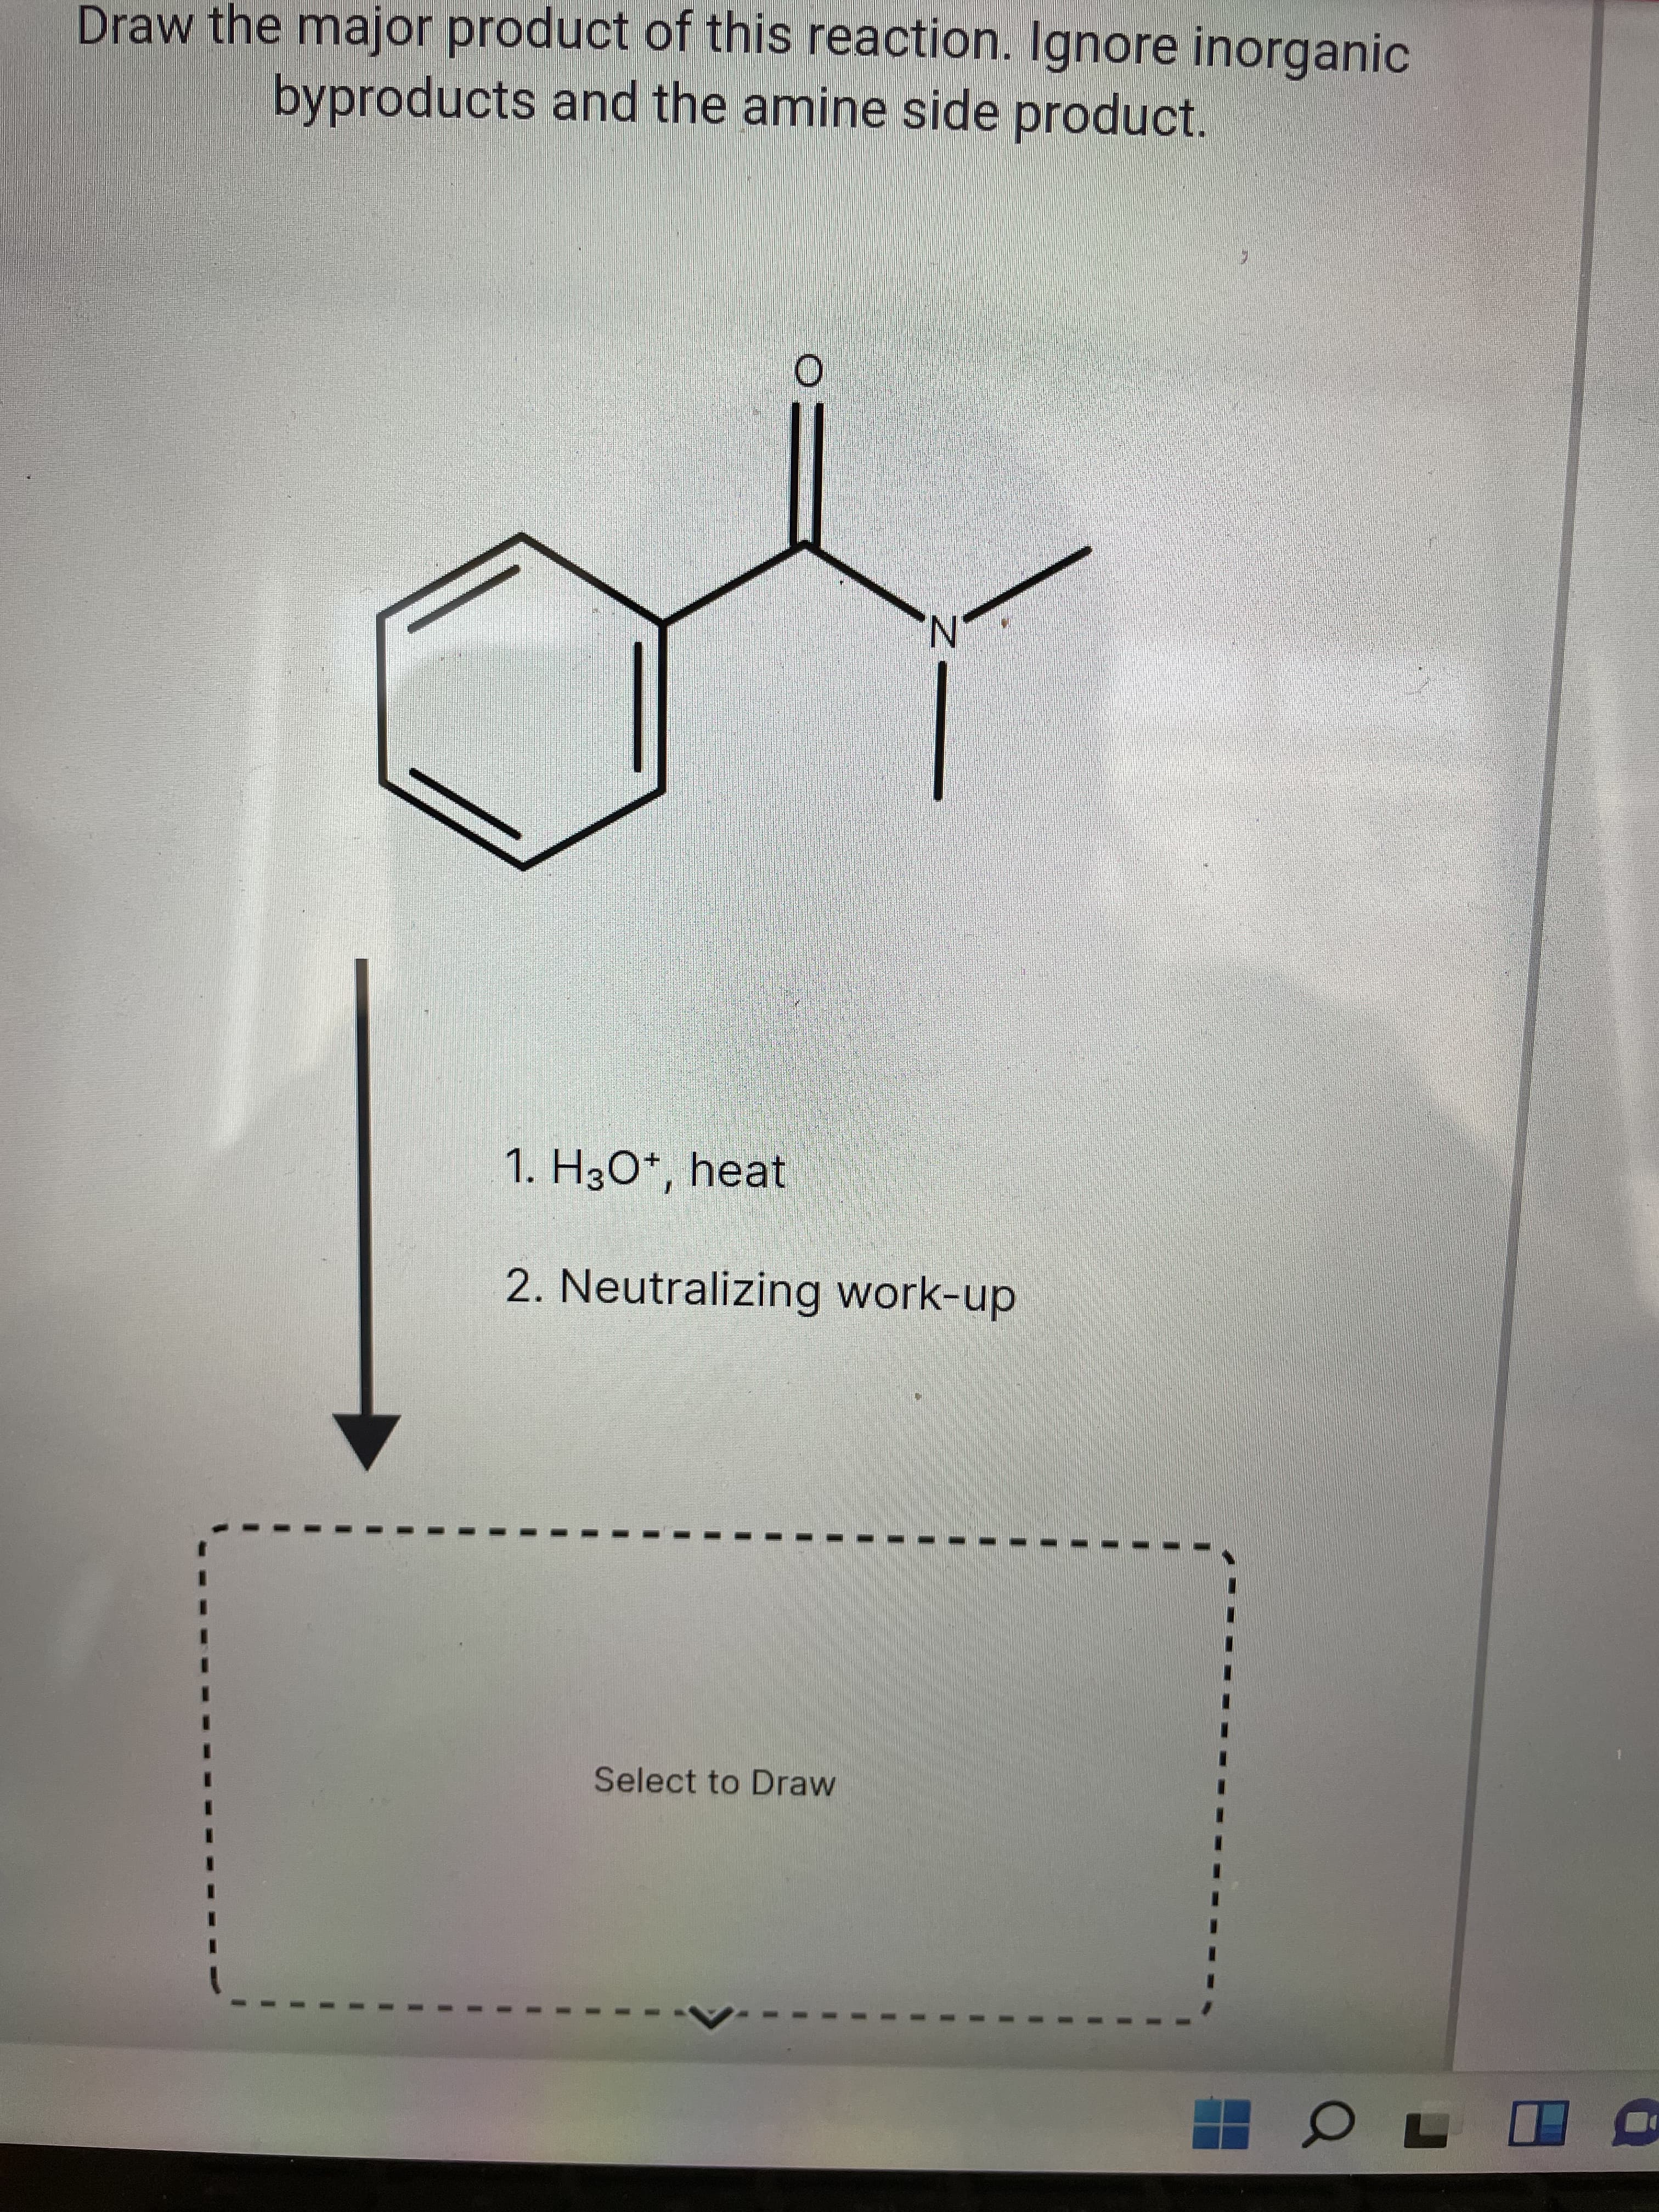 Draw the major product of this reaction. Ignore inorganic
byproducts and the amine side product.
N'
1. H3O*, heat
2. Neutralizing work-up
Select to Draw
